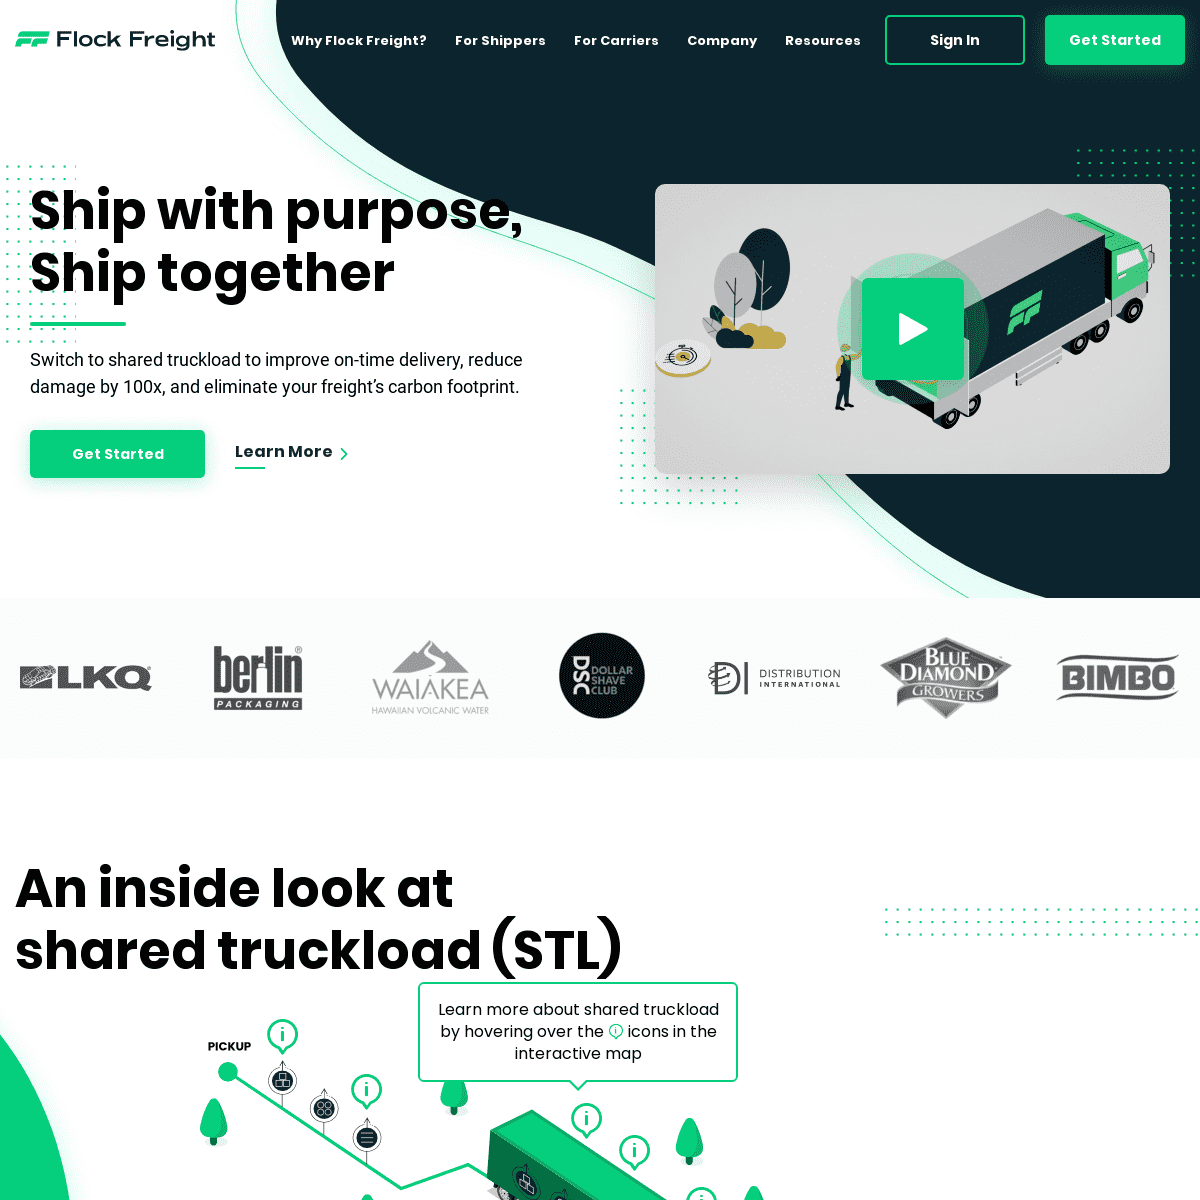 A complete backup of https://flockfreight.com